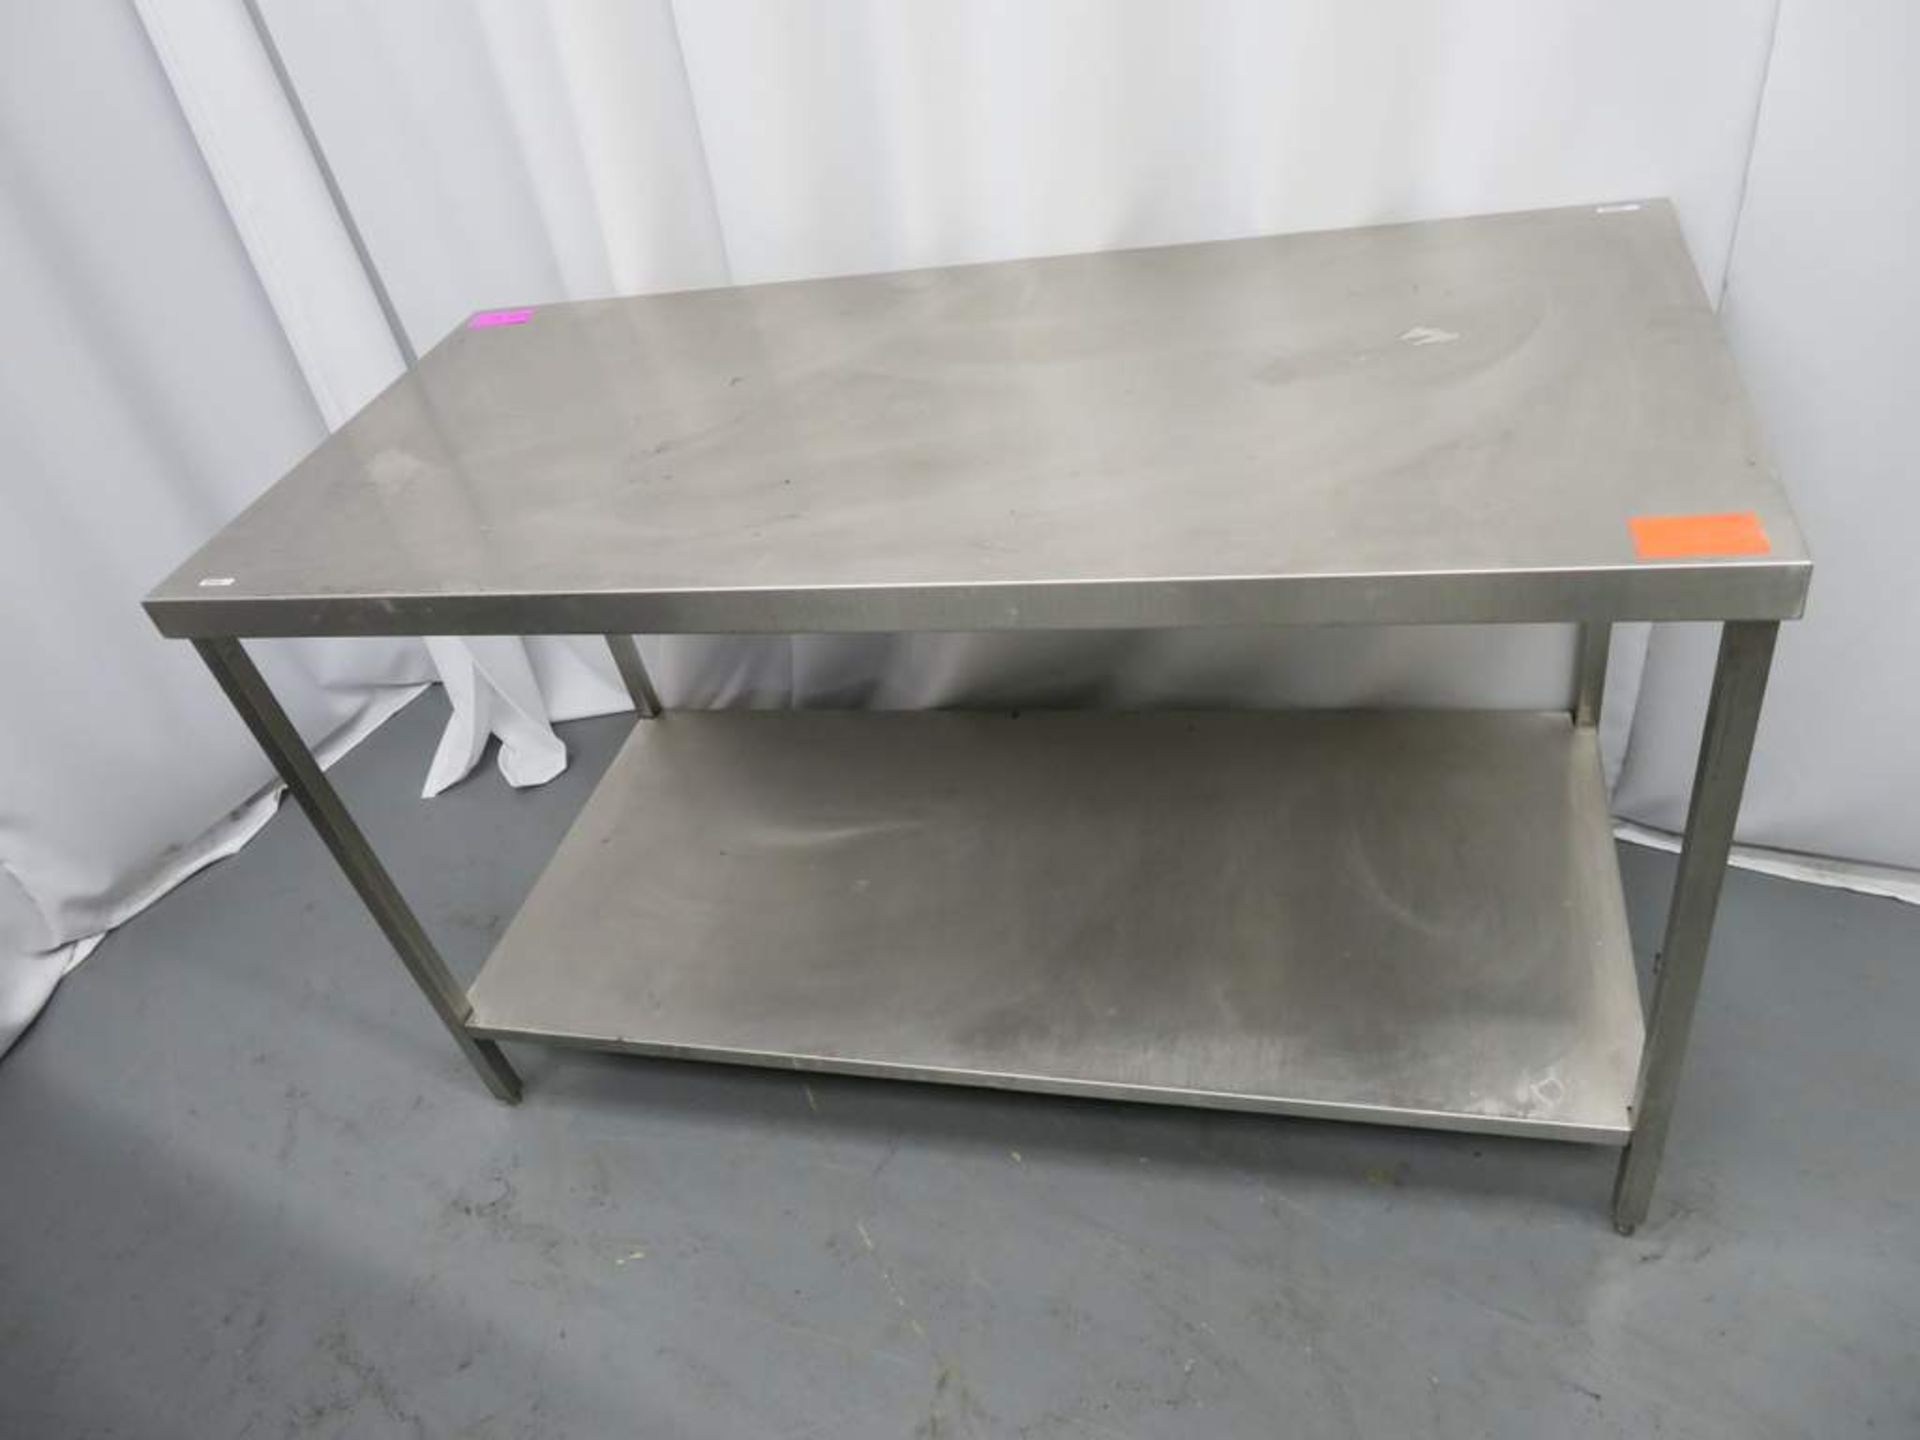 Stainless Steel Preparation Table. Dimensions: 1500x700x920mm (LxWxH) - Image 4 of 4